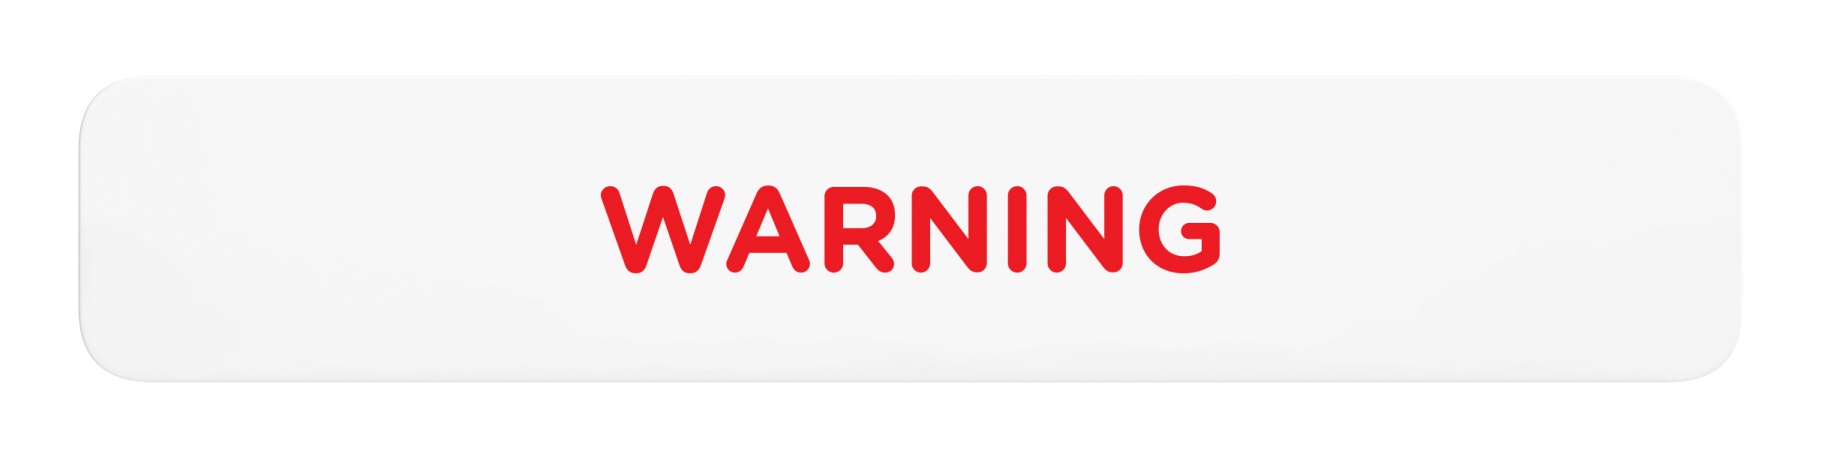 Warning_Sign_Door_Wall Mount Sign_8x1.5_6mm Thick Solid Surface Sign with Inlay Resins_Self Adhesive